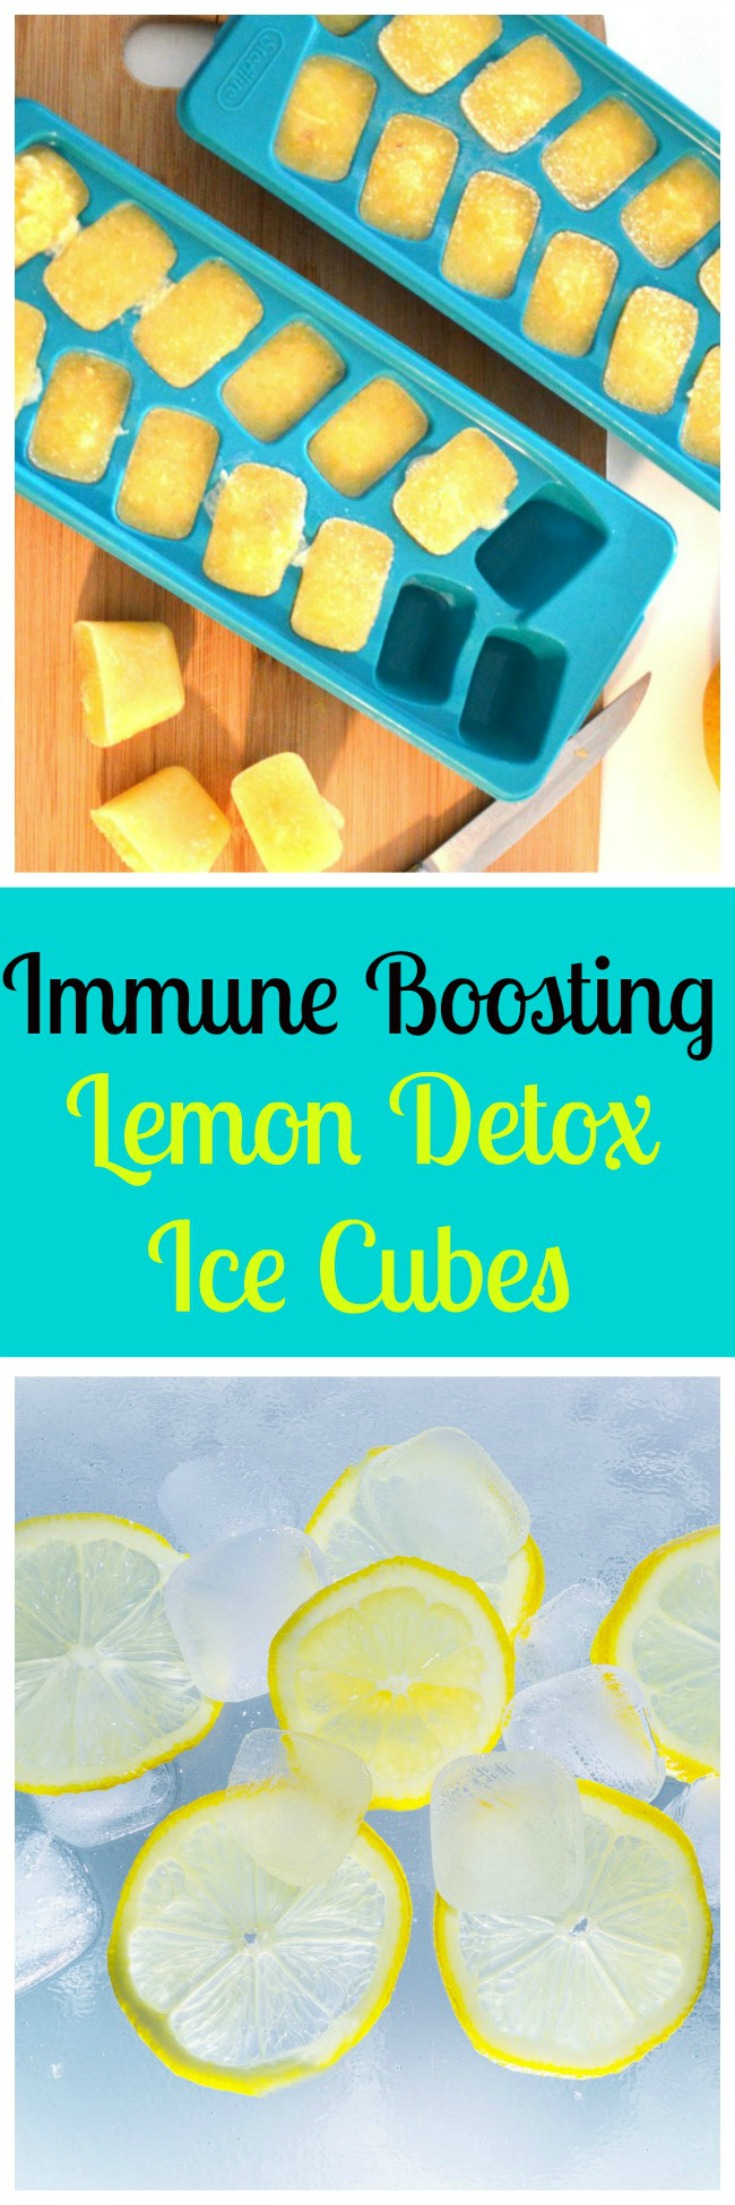 Feeling sluggish, need weight loss help? Try these Immune Boosting Lemon Detox Ice Cubes. Filled with vital beneficial nutrients to combat ill health and to help detox your system